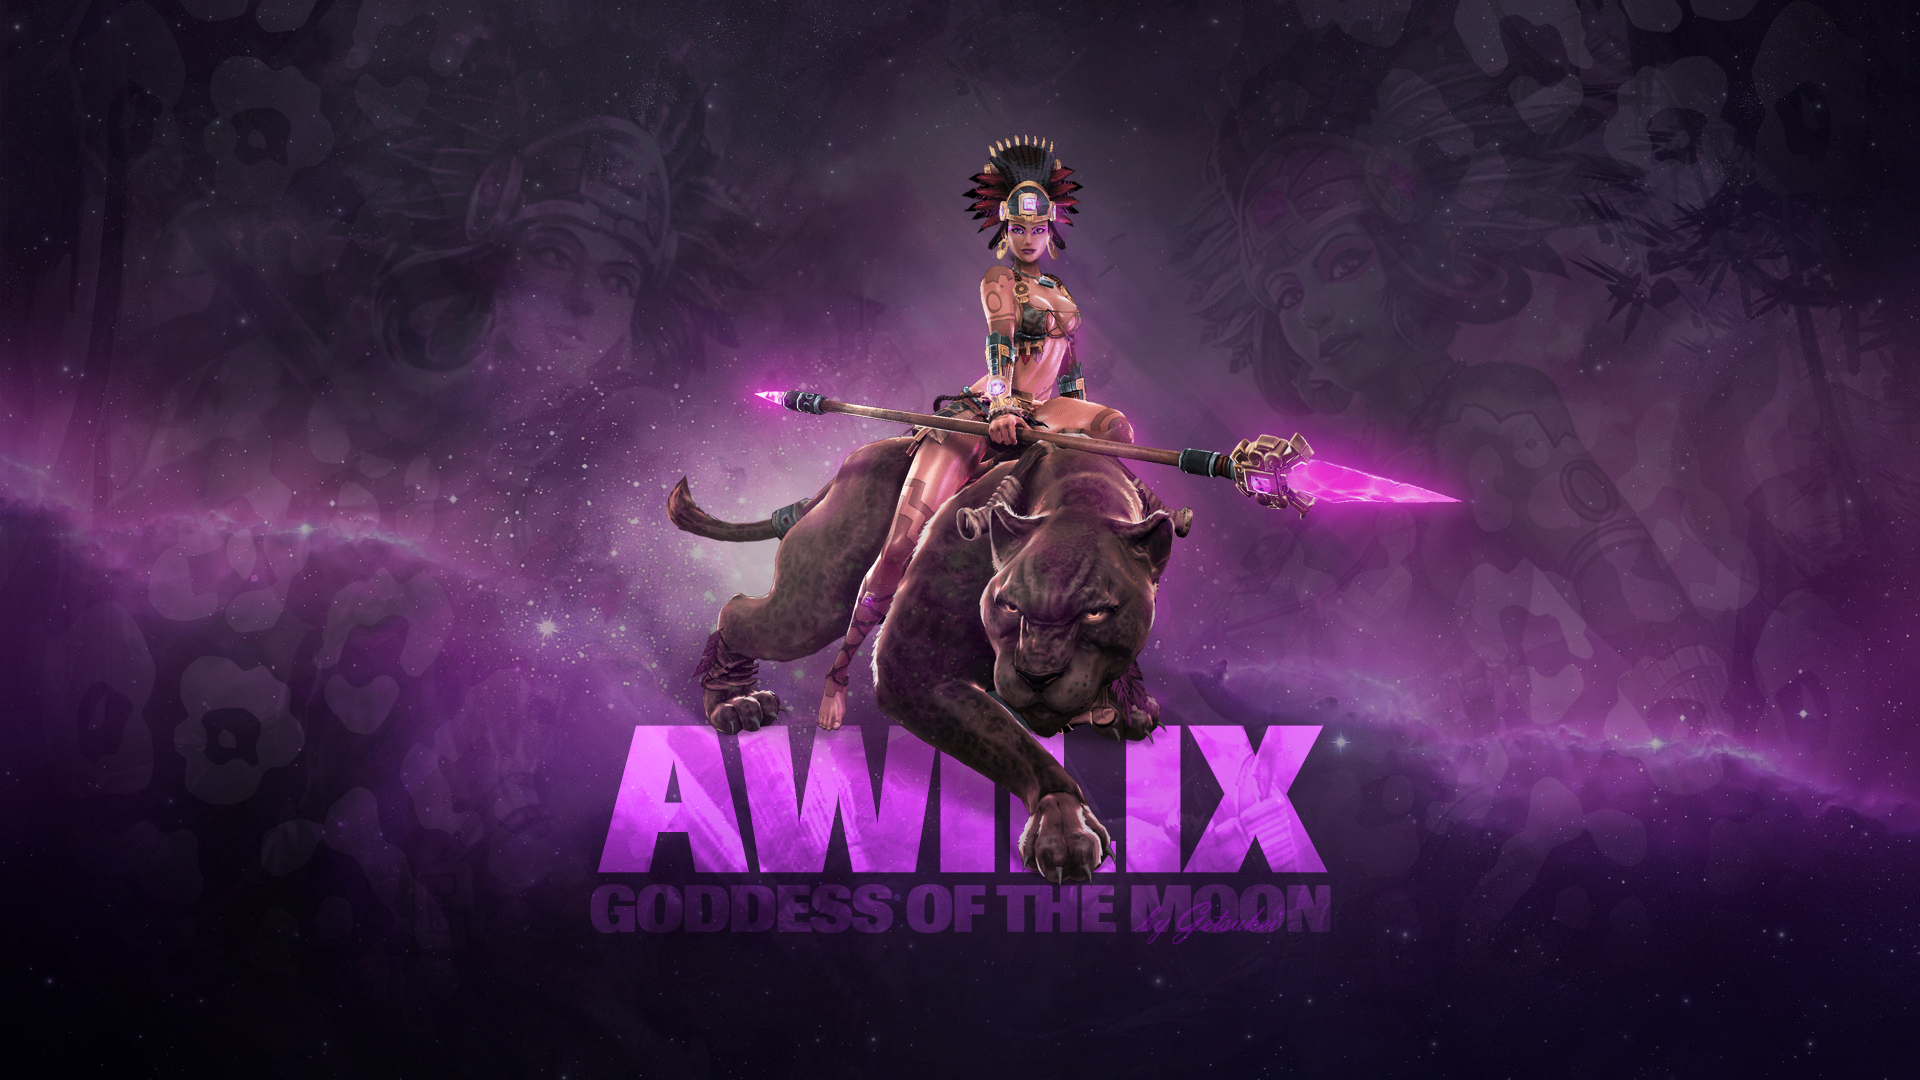 SMITE   Awilix Goddess of the Moon Wallpaper by Getsukeii on 1920x1080